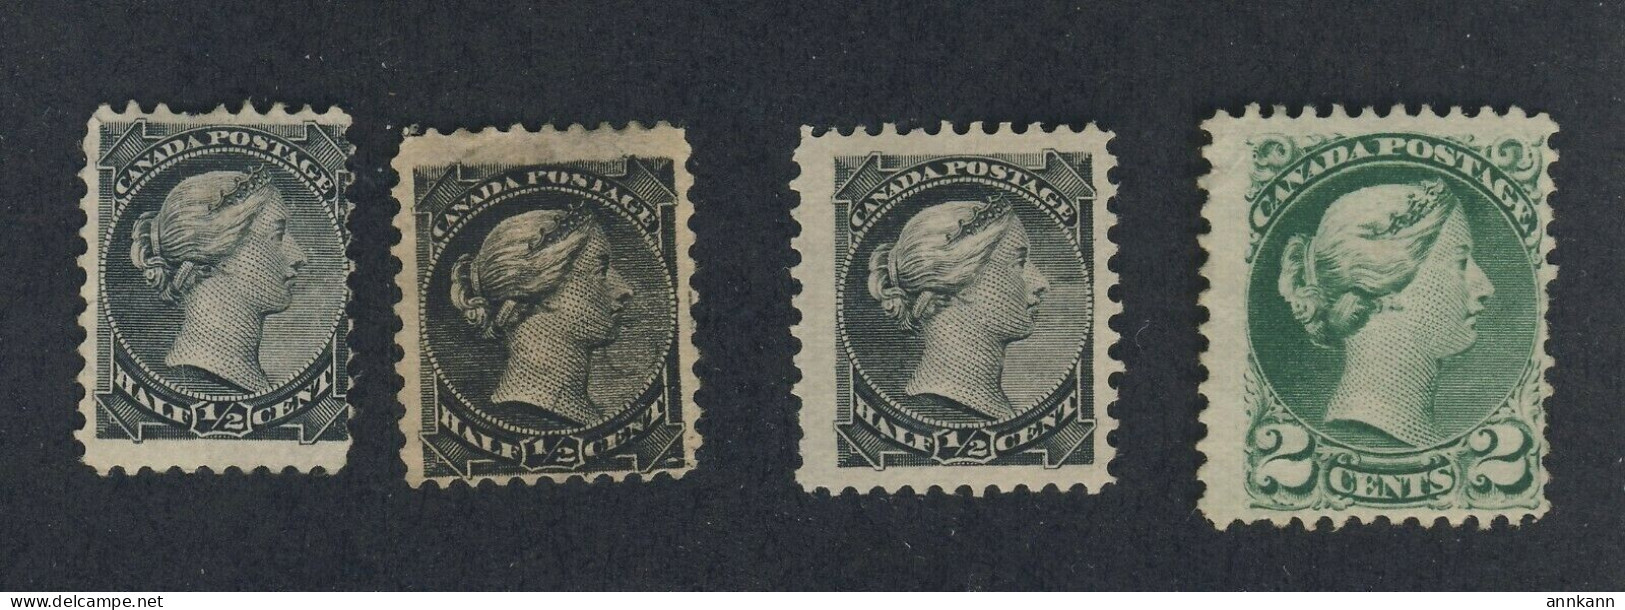 4x Canada Small Queen MNG Stamps 3x #34-1/2c F F/VF VF #36-2c Fine GV = $100.00 - Neufs